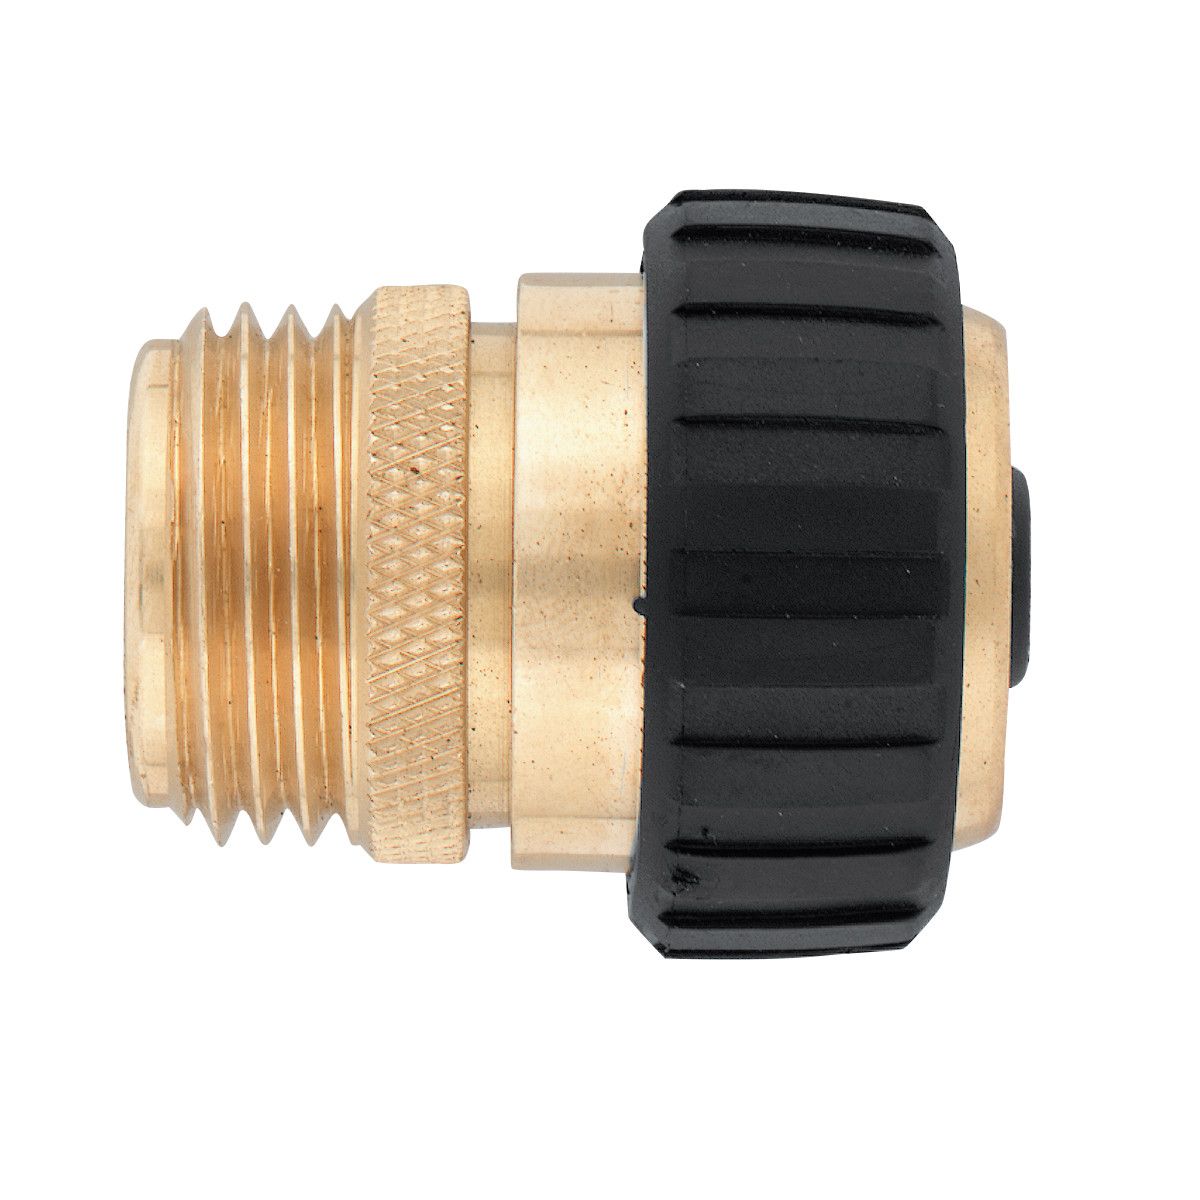 Shrub Head Sprinkler Adapters with Brass Nozzles